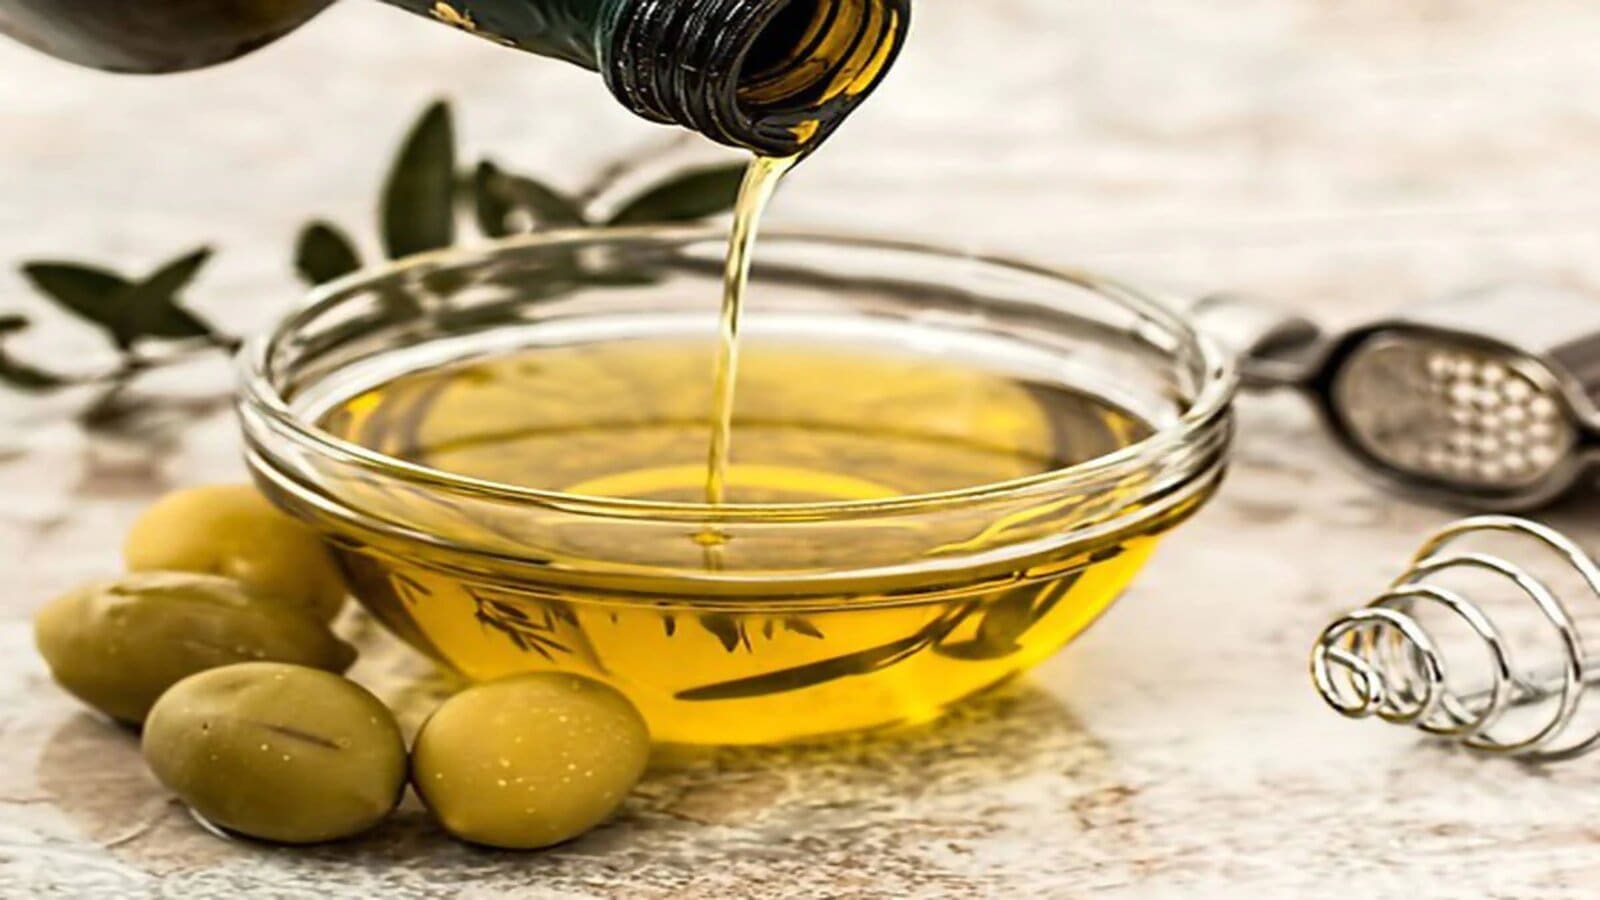 Tunisia forecasts earning up to US$957M from its olive oil shipments in 2022/2023